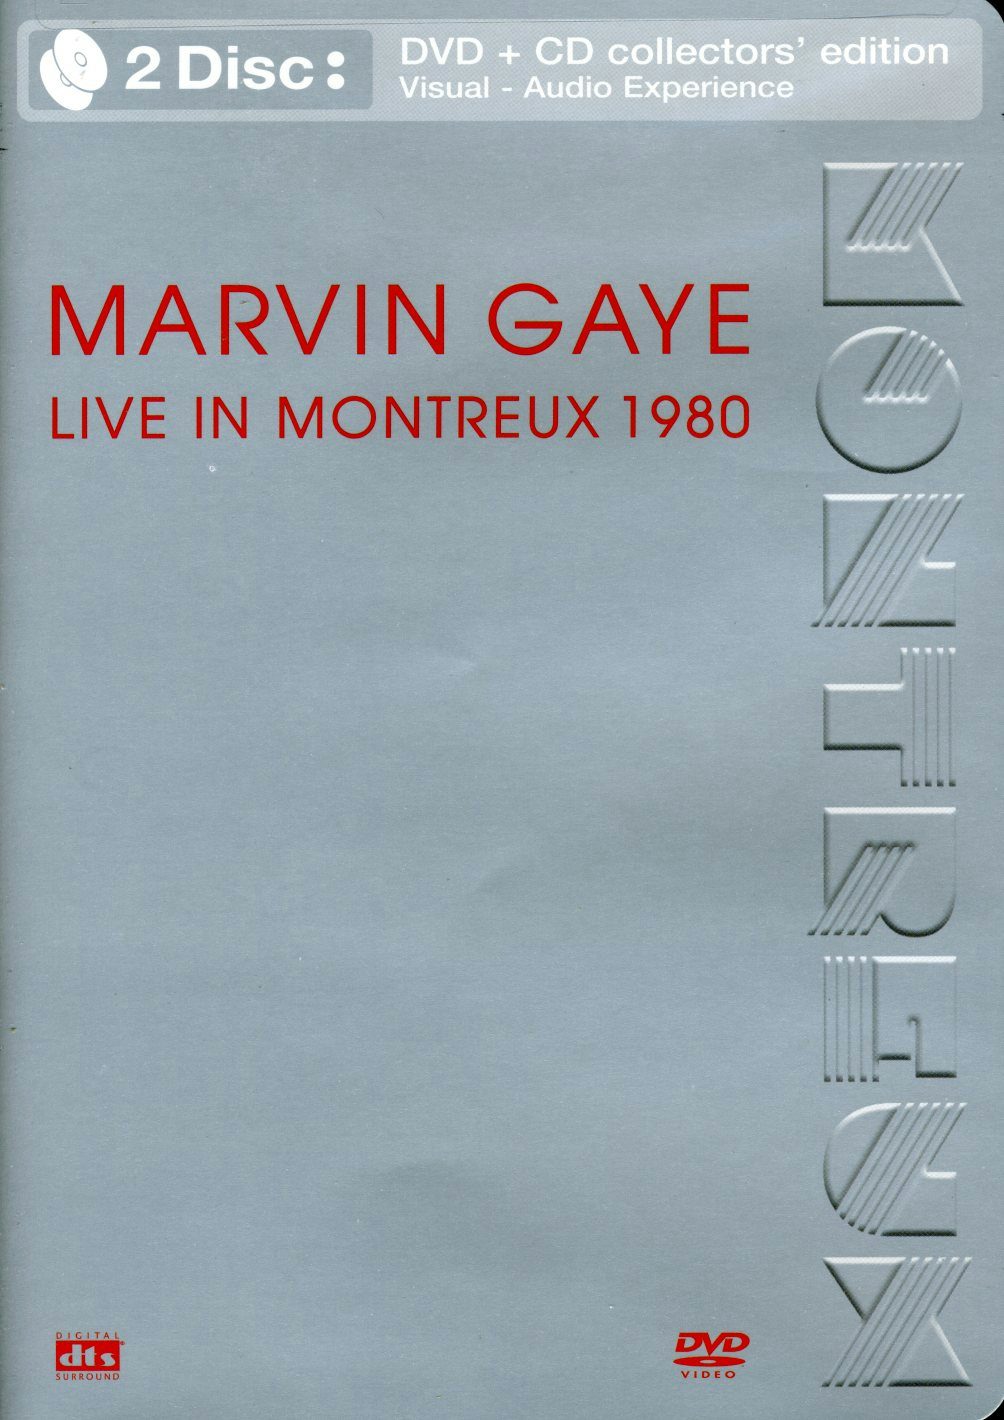 MARVIN GAYE DVD LIVE in MONTREUX 1980 / GREATEST hits live in 76